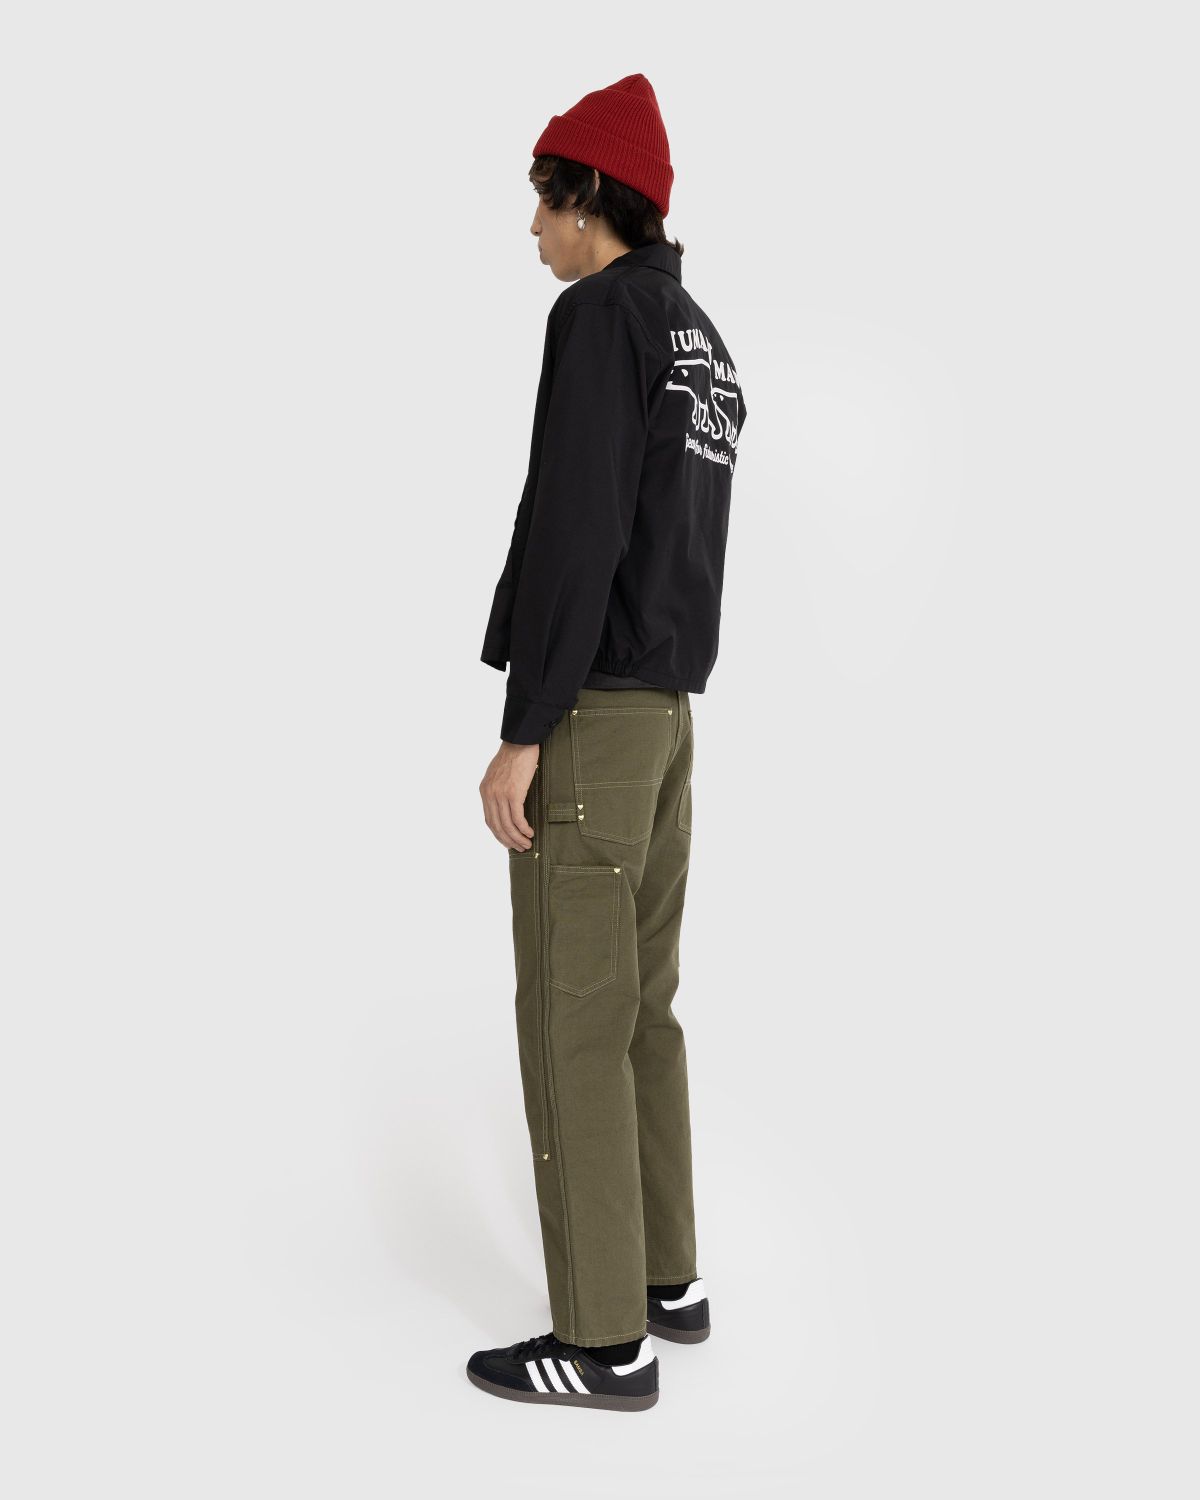 Human Made – Duck Painter Pants Olive Drab | Highsnobiety Shop